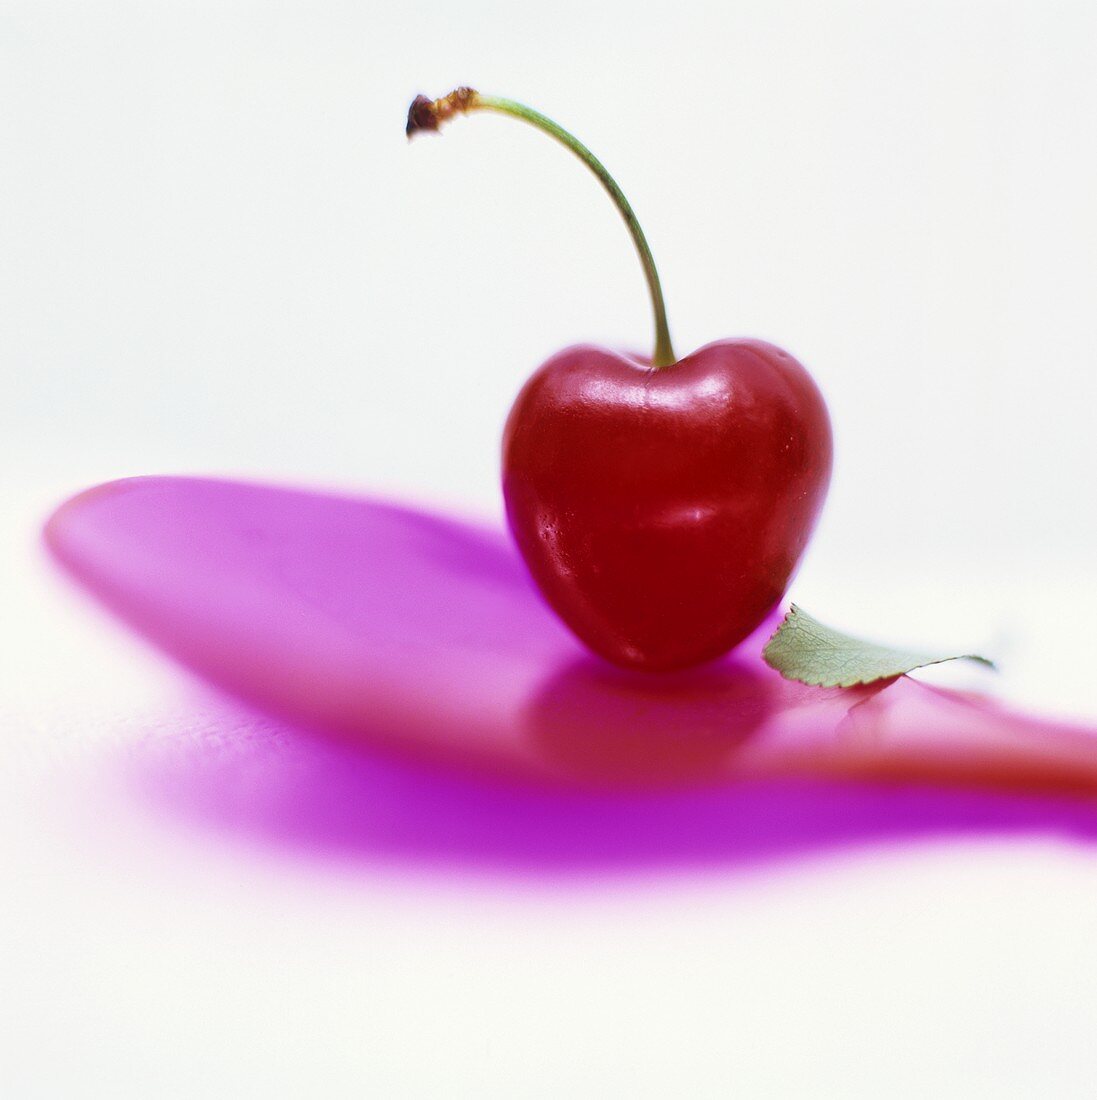 A red cherry